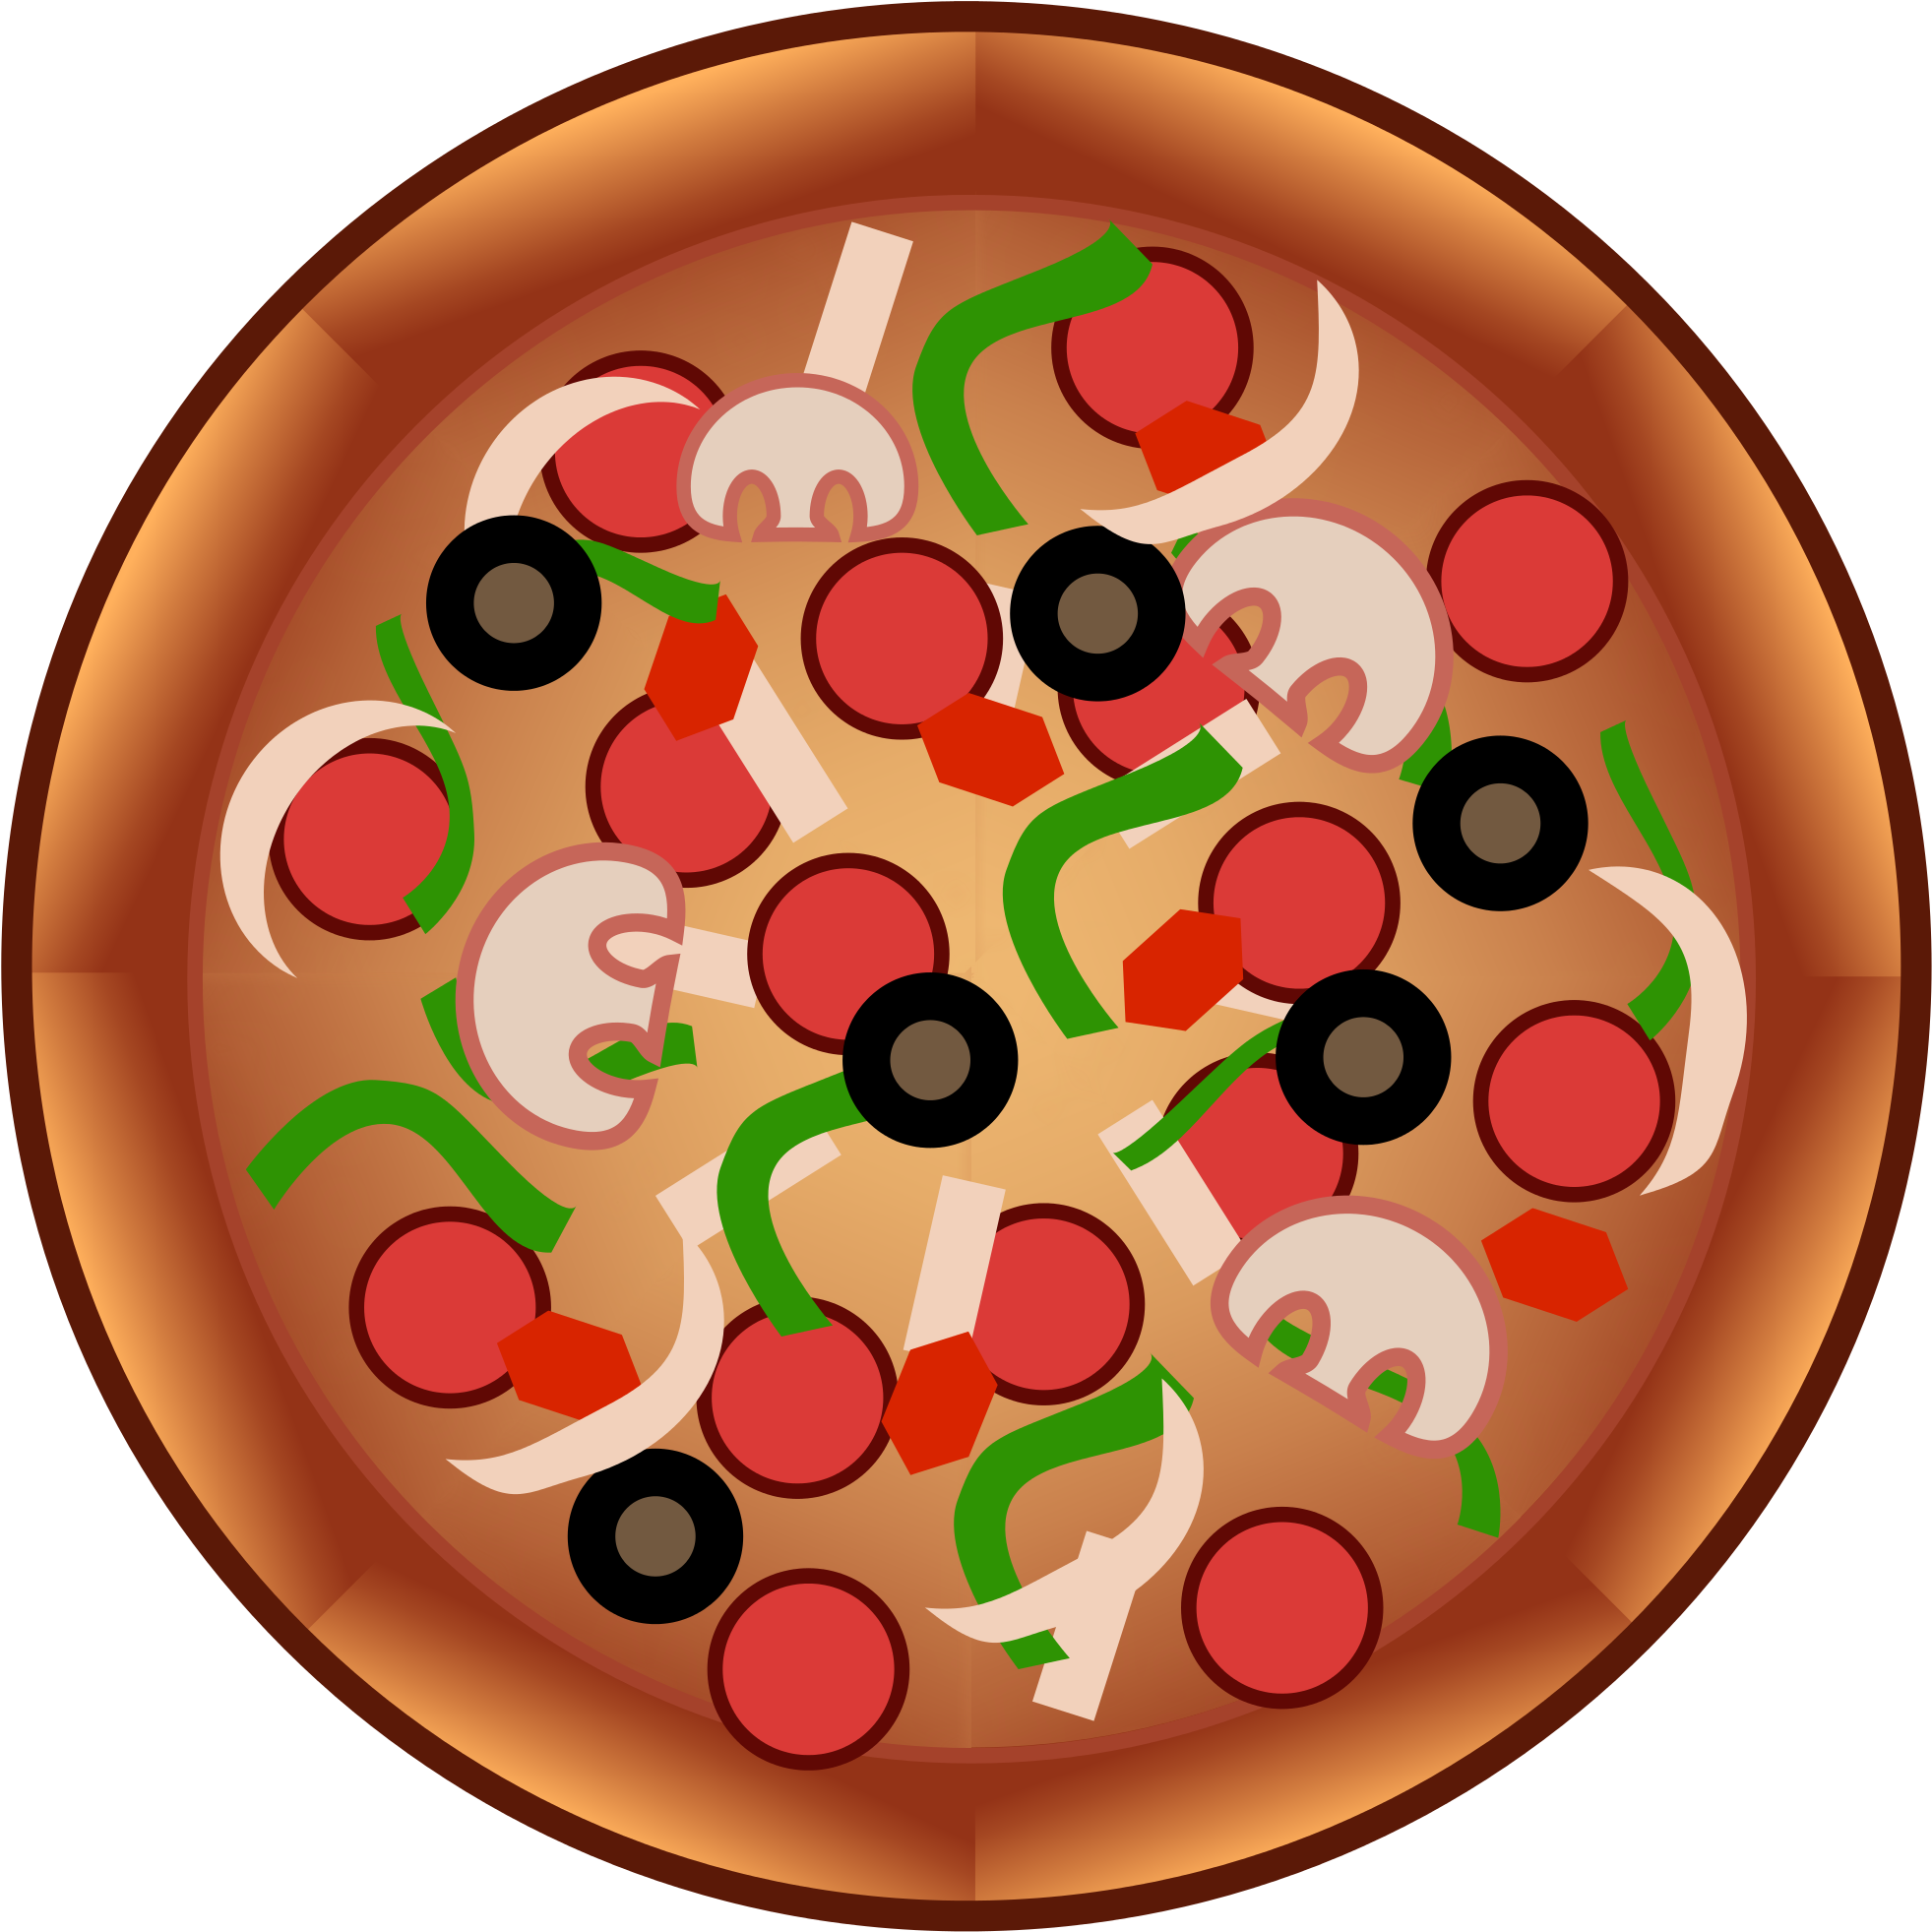 Create Your Own Pizza - Problem Solving (2000x2000)